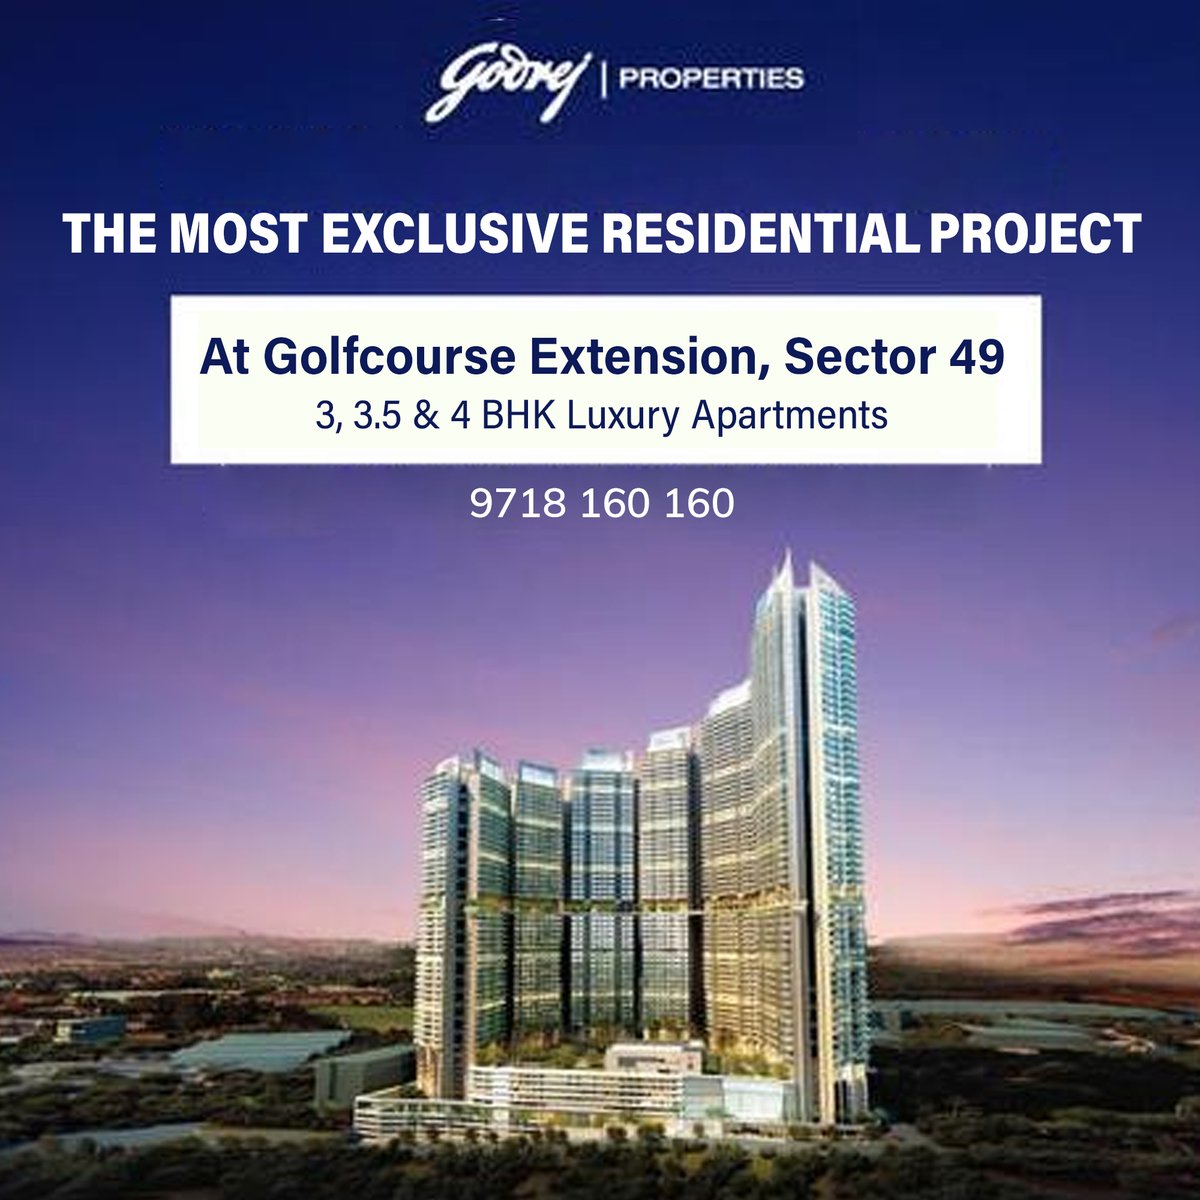 The Most Exclusive #ResidentialProject - Godrej 49

At #GolfcourseExtension, #Sector49, #Gurgaon

#3bhk to #4BHK #LuxuryApartments

#residential #realestate #architecture #construction #home #design #interiordesign #property #realtor #investment #interior #luxury #house